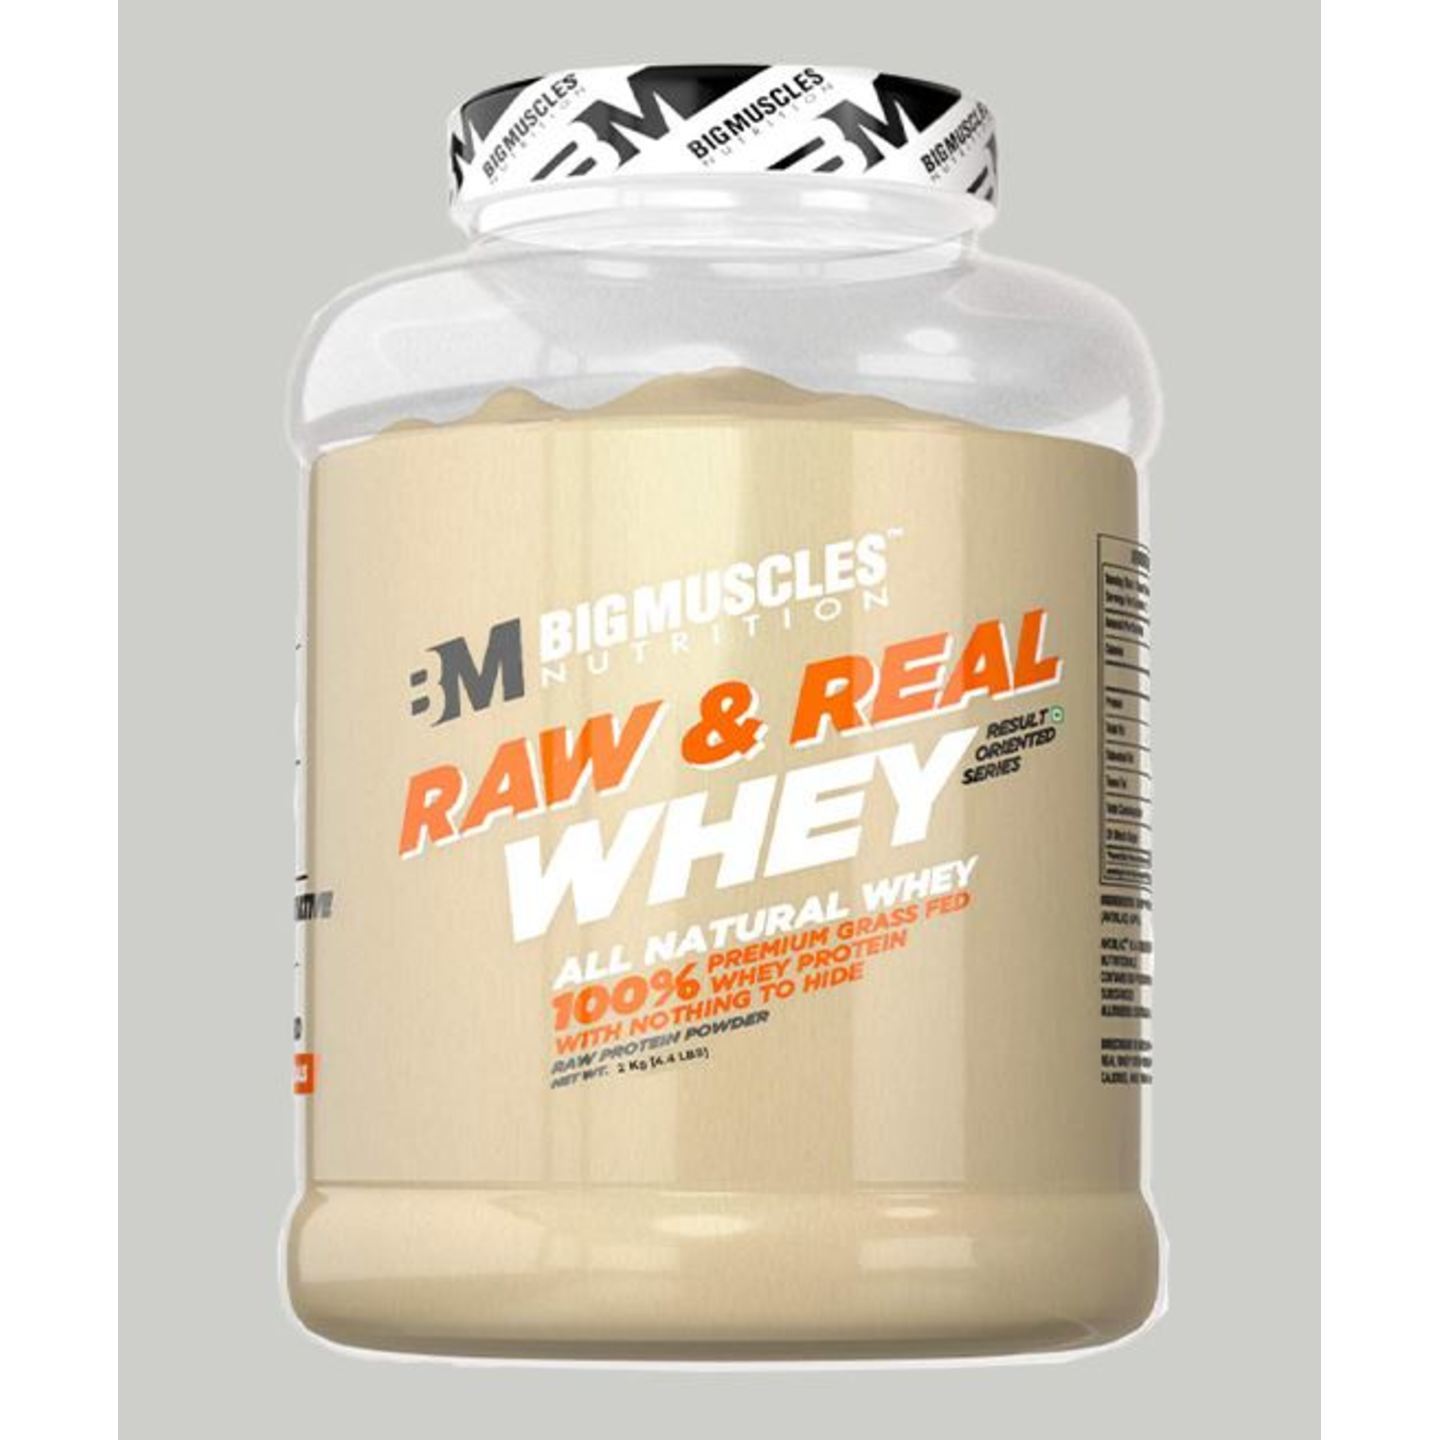 MastMart Bigmuscles Nutrition Raw & Real Whey Protein Unflavoured 4.4 lbs